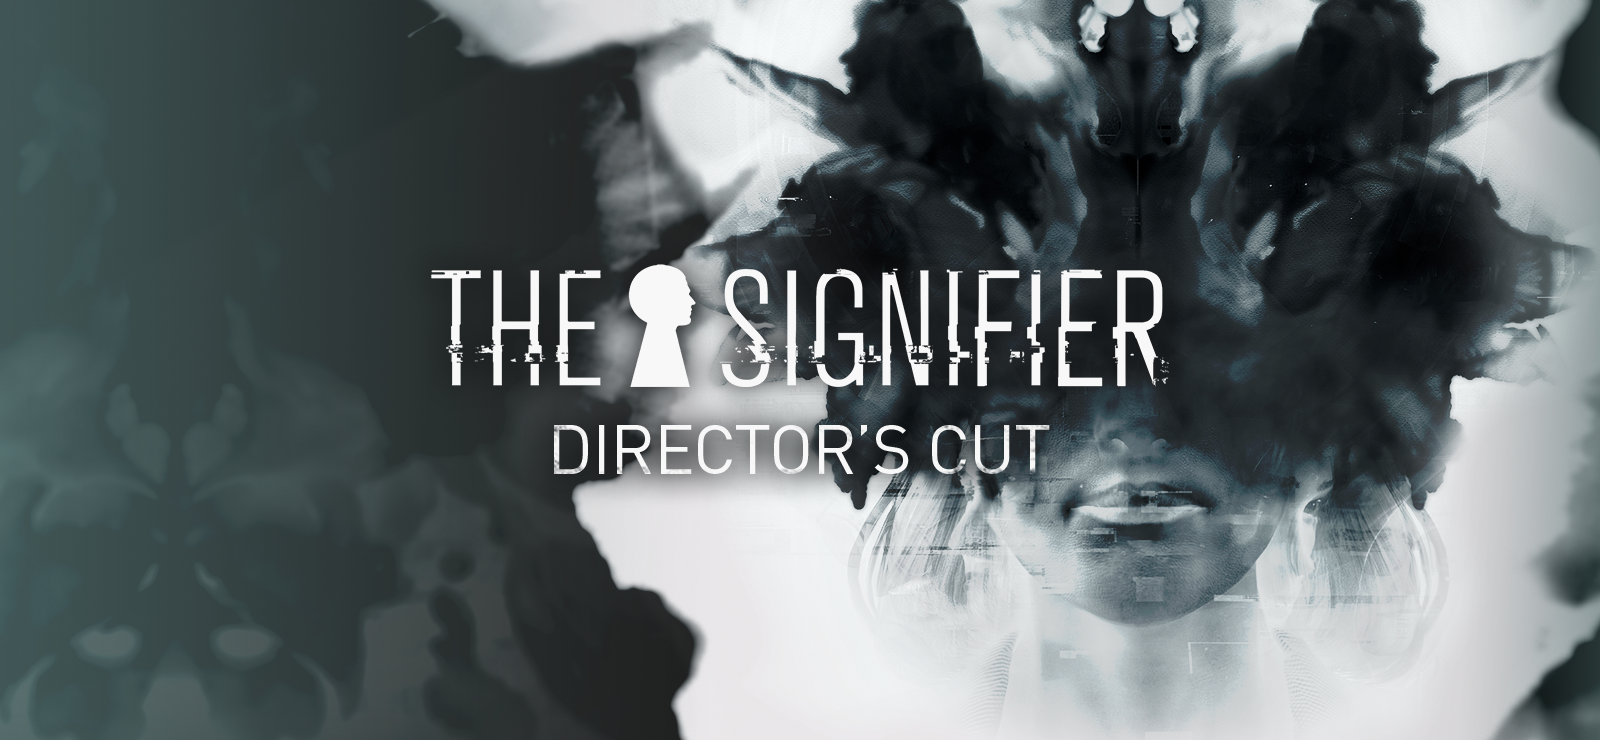 The Signifier Director's Cut